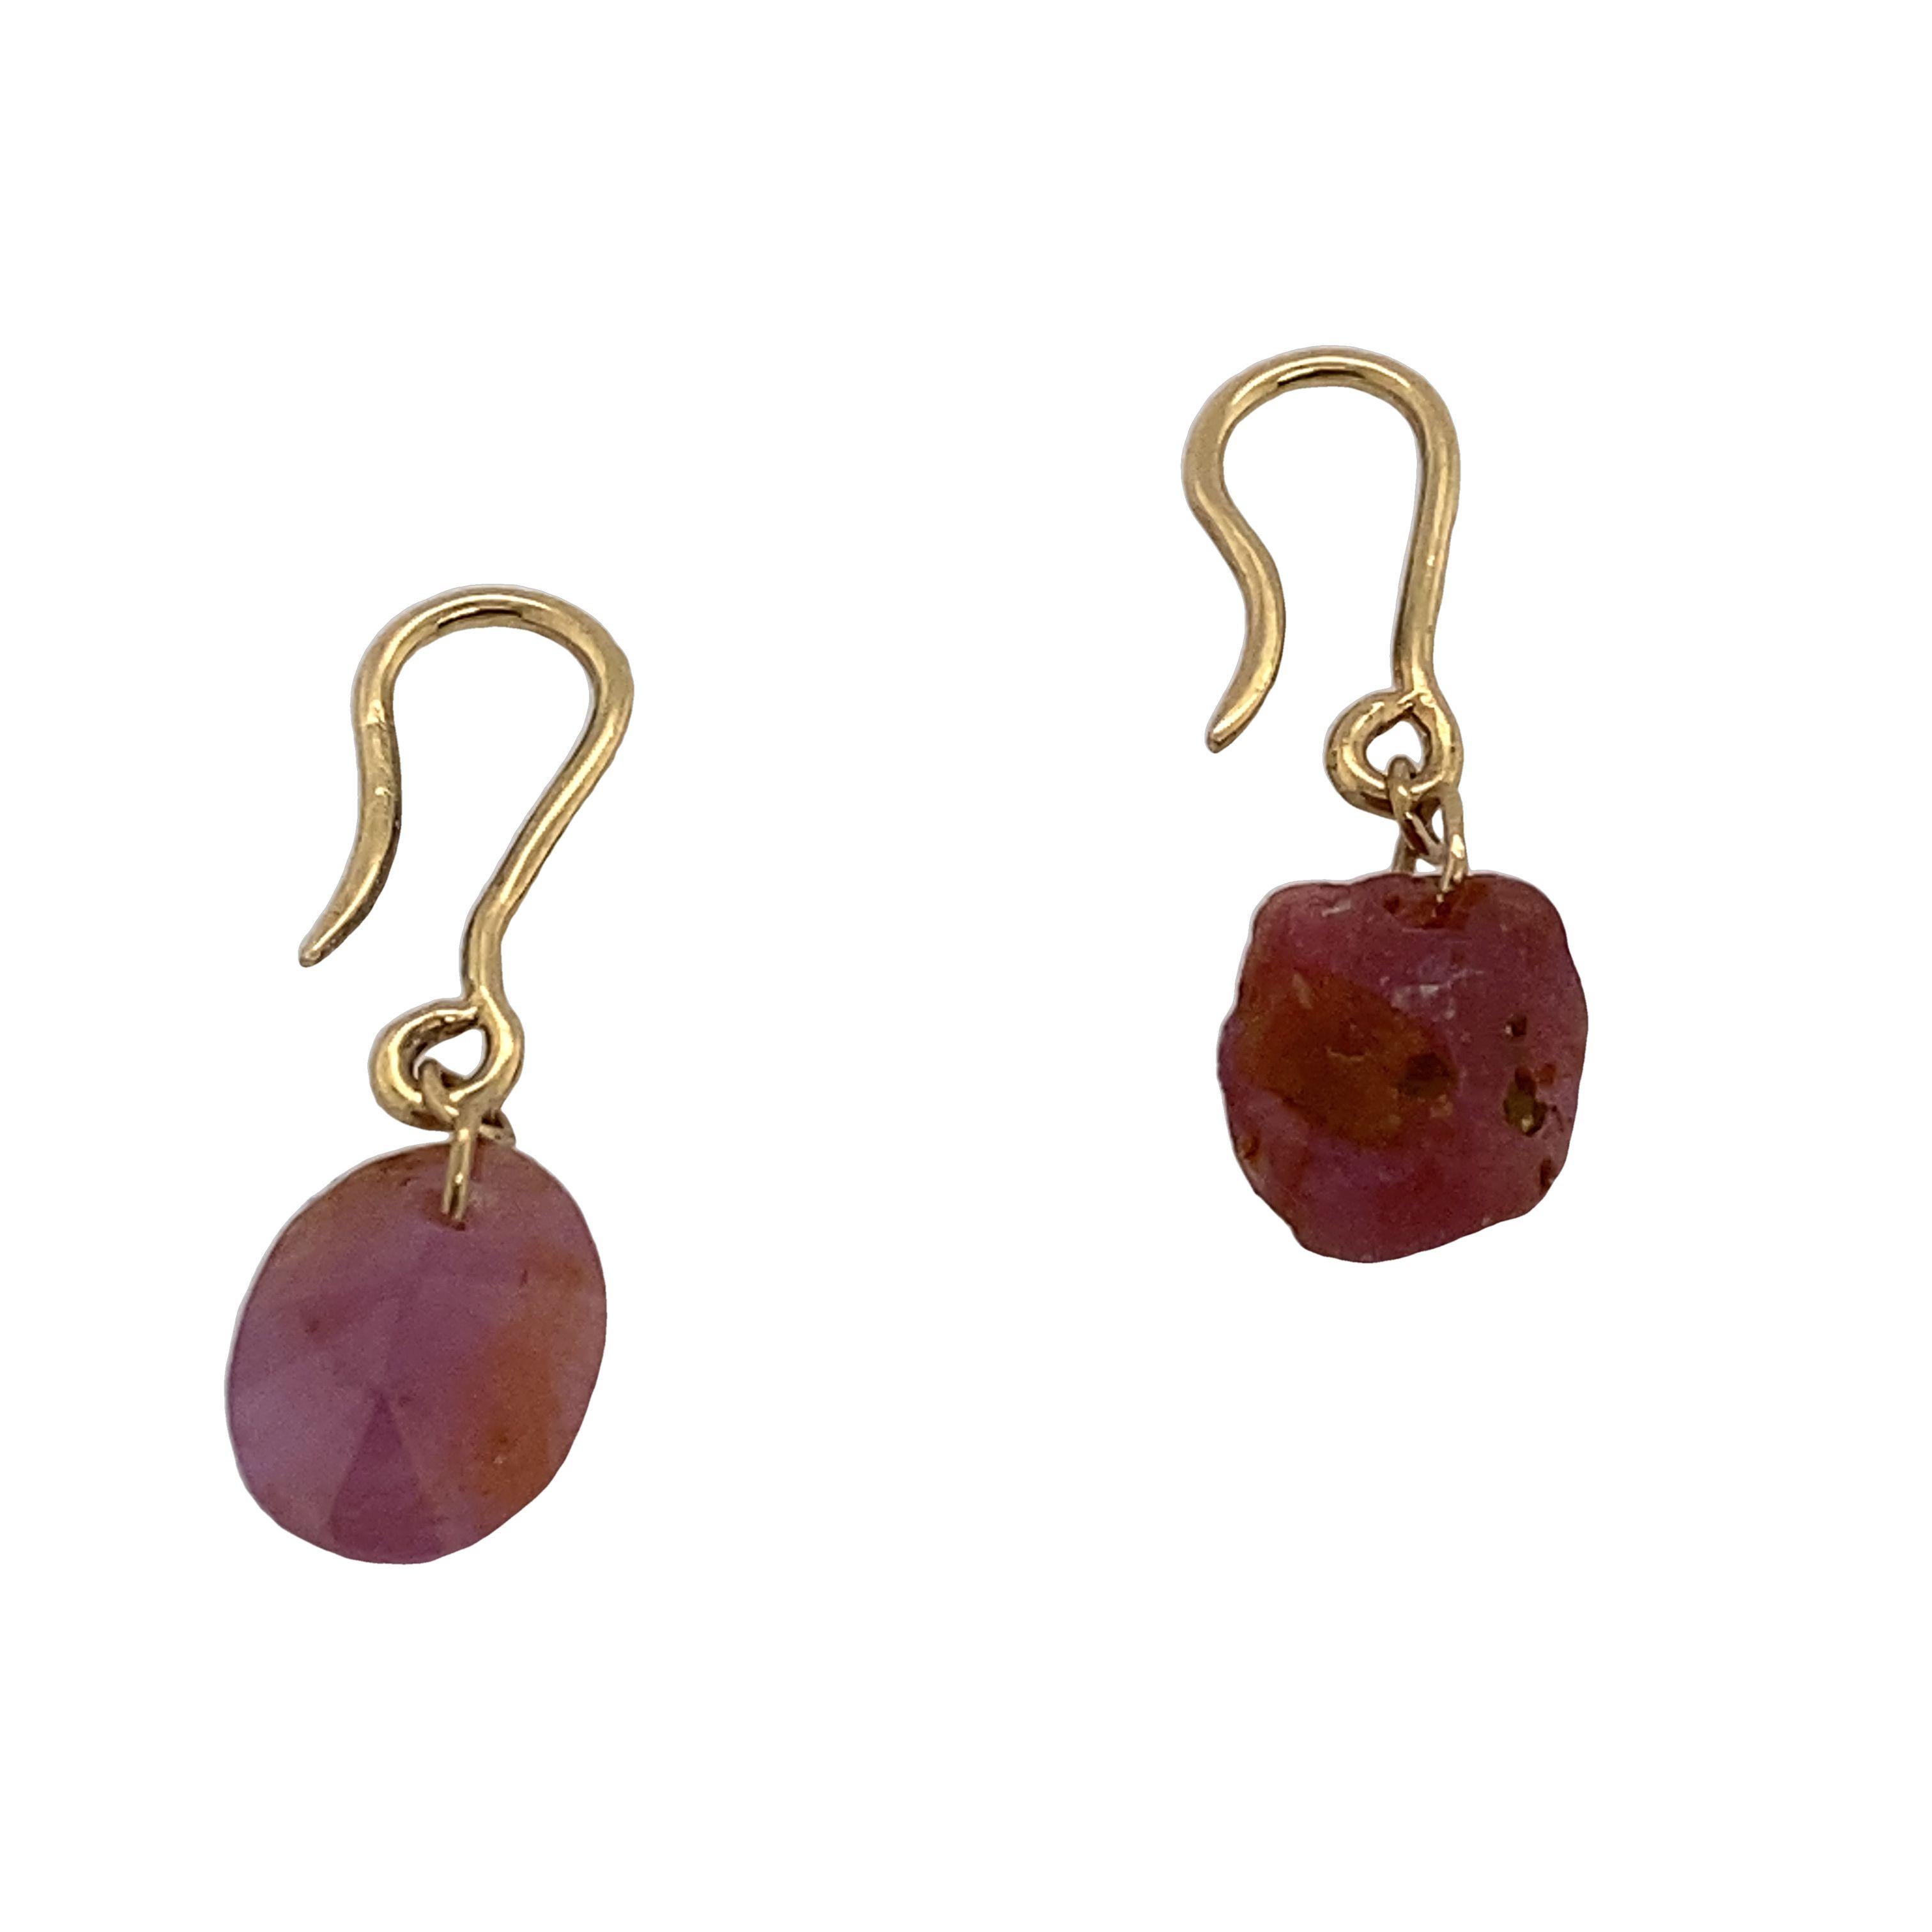 Uncut 3.80ct Natural Ruby Earrings on Hook Fittings in 18ct Yellow Gold For Sale